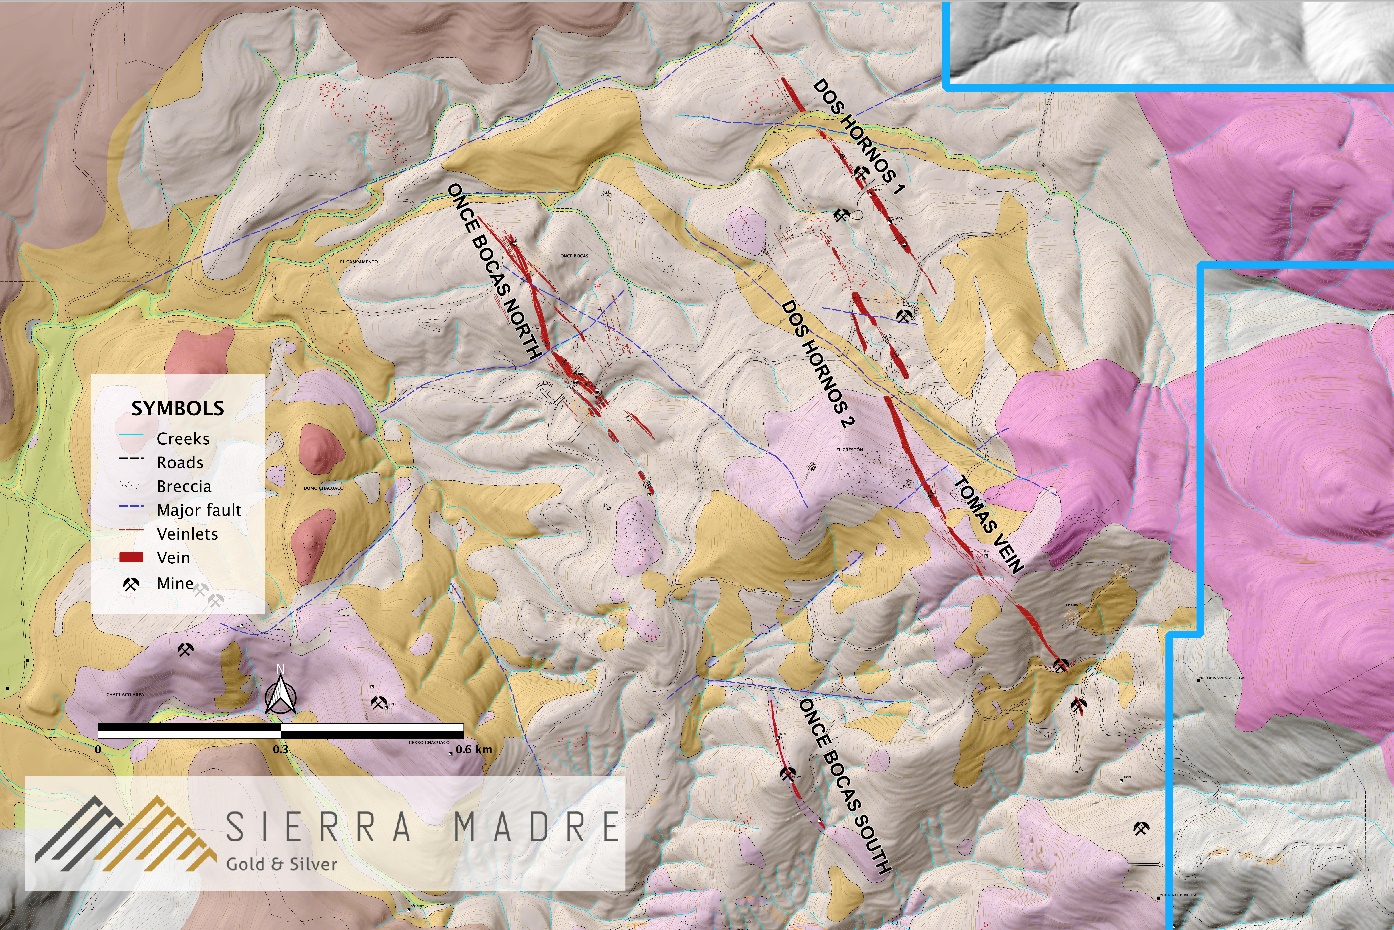 Sierra Madre Gold and Silver, Tuesday, May 4, 2021, Press release picture